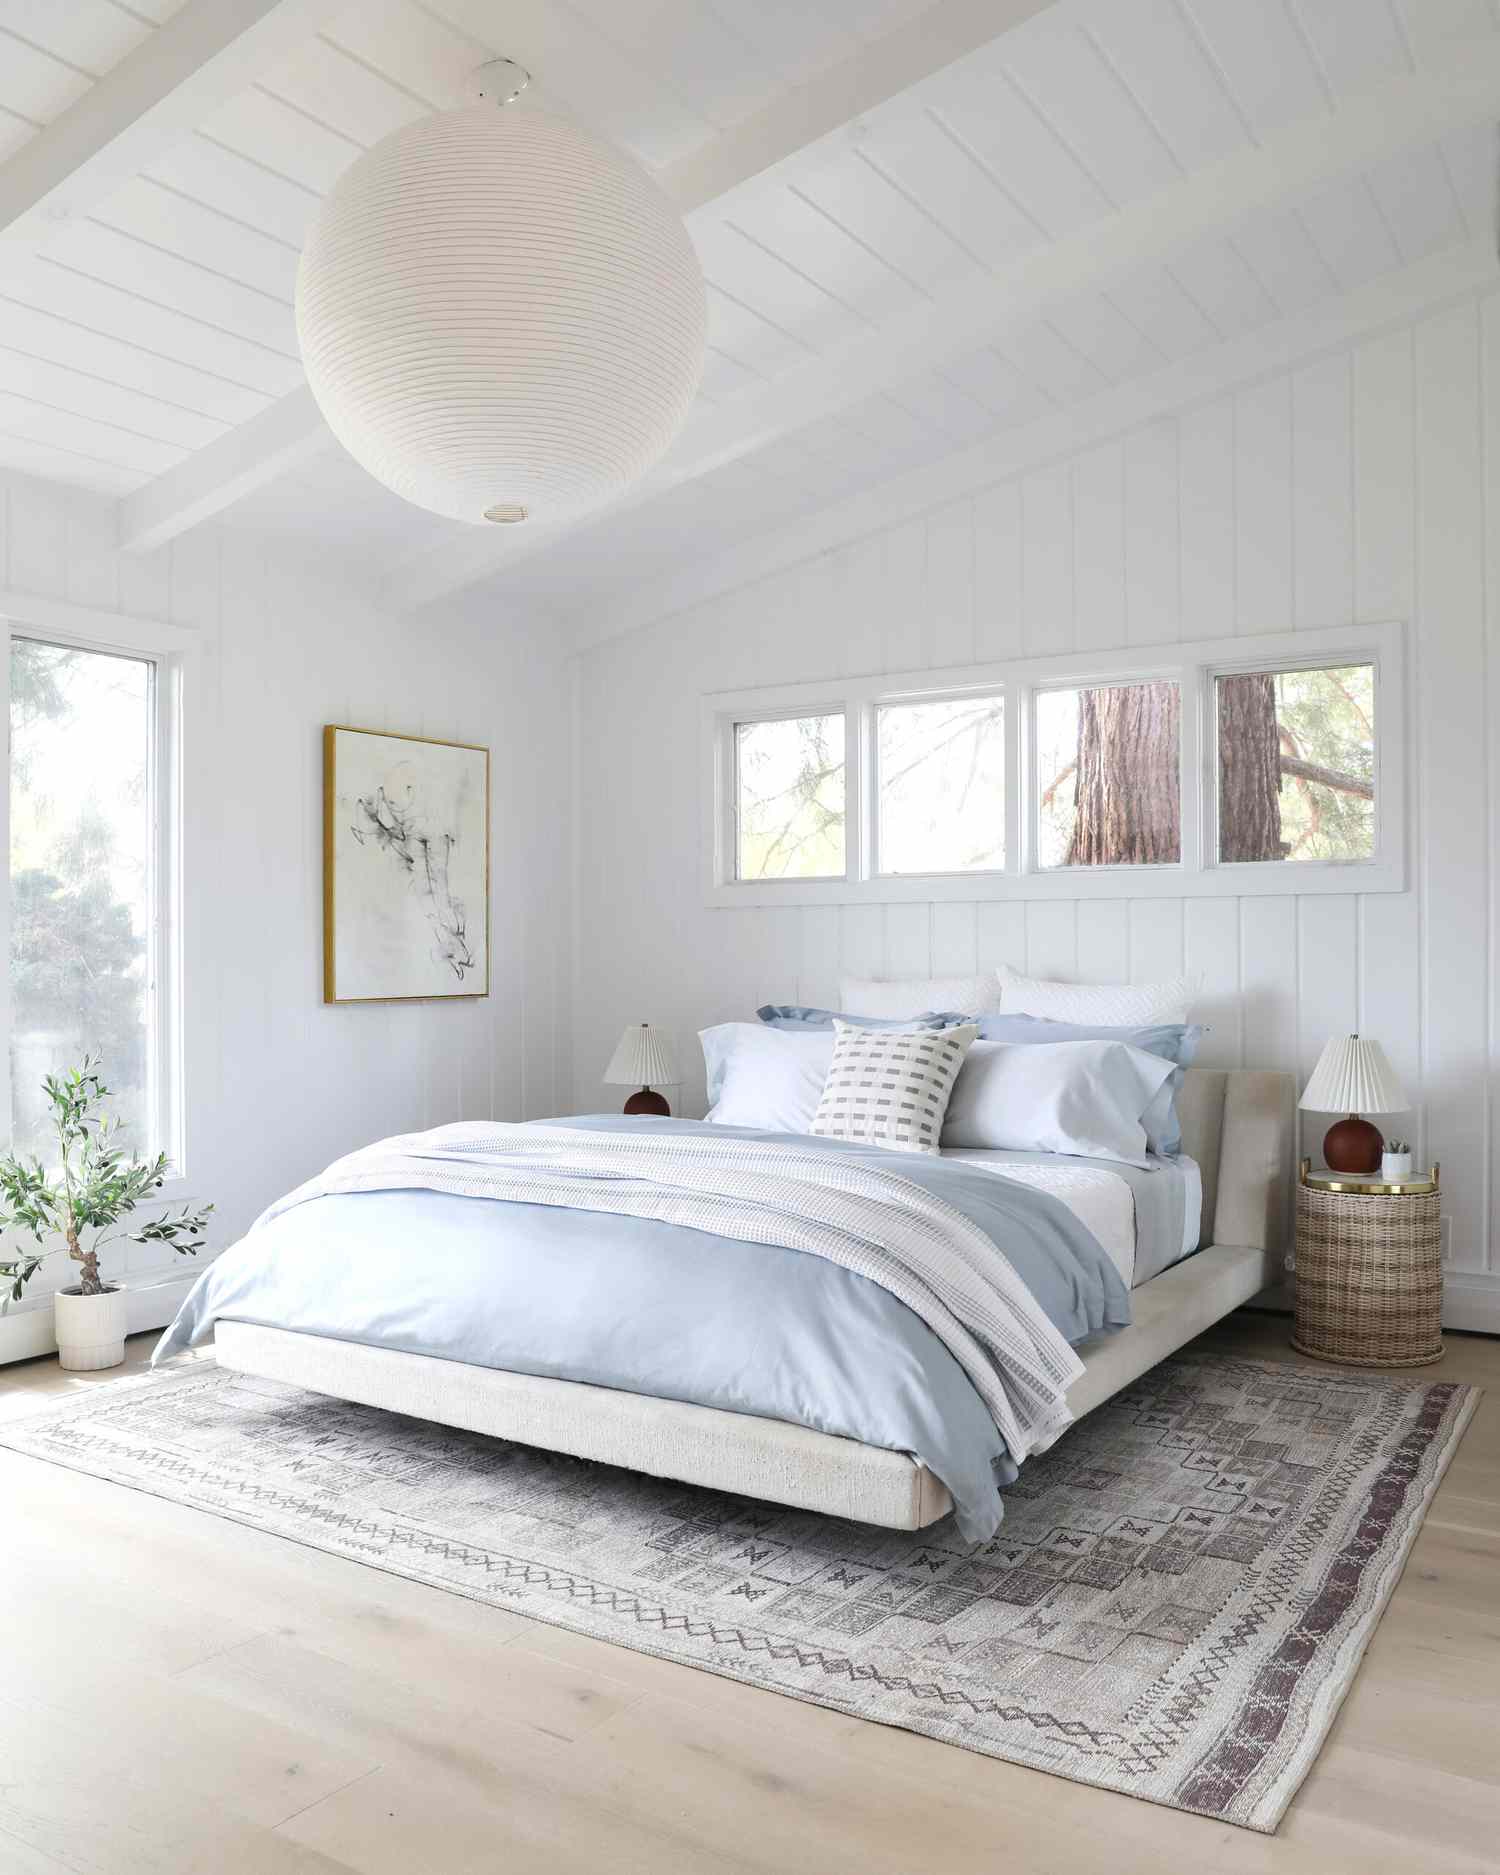 Wood accent wall ideas with white shiplap on walls and ceiling